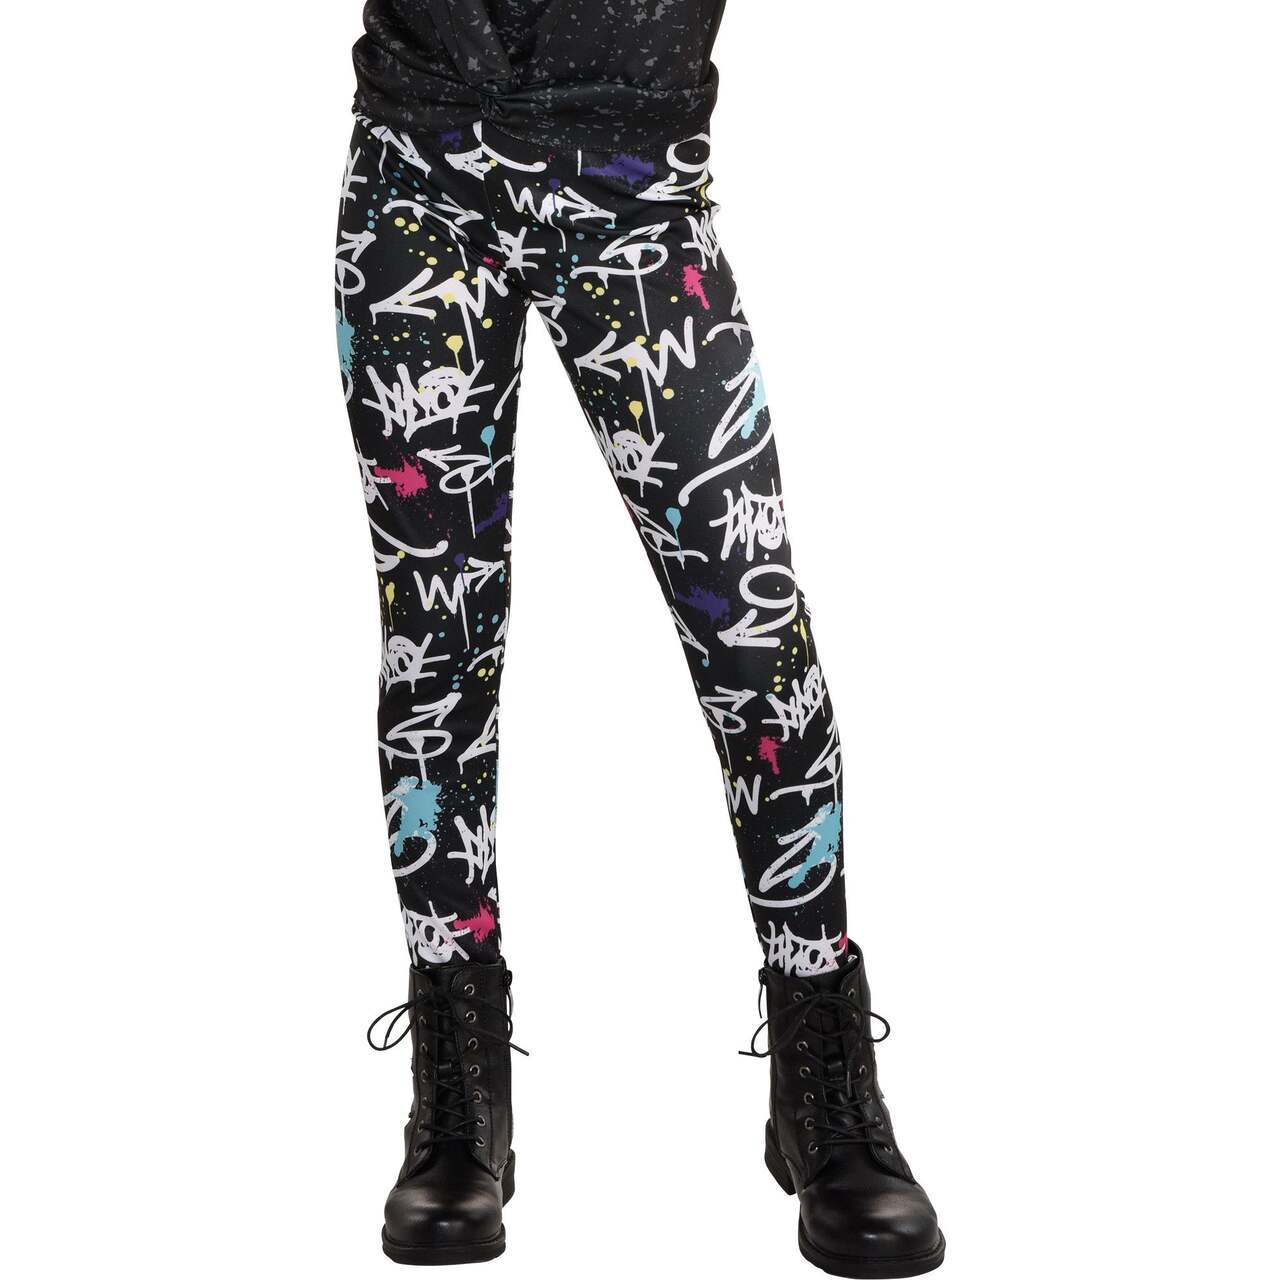 https://media-www.canadiantire.ca/product/seasonal-gardening/party-city-seasonal/party-city-halloween-and-fall-decor/8550543/punk-leggings-child-standard-51b94ee1-24d1-4d37-98c8-7451c81fc96c-jpgrendition.jpg?imdensity=1&imwidth=640&impolicy=mZoom